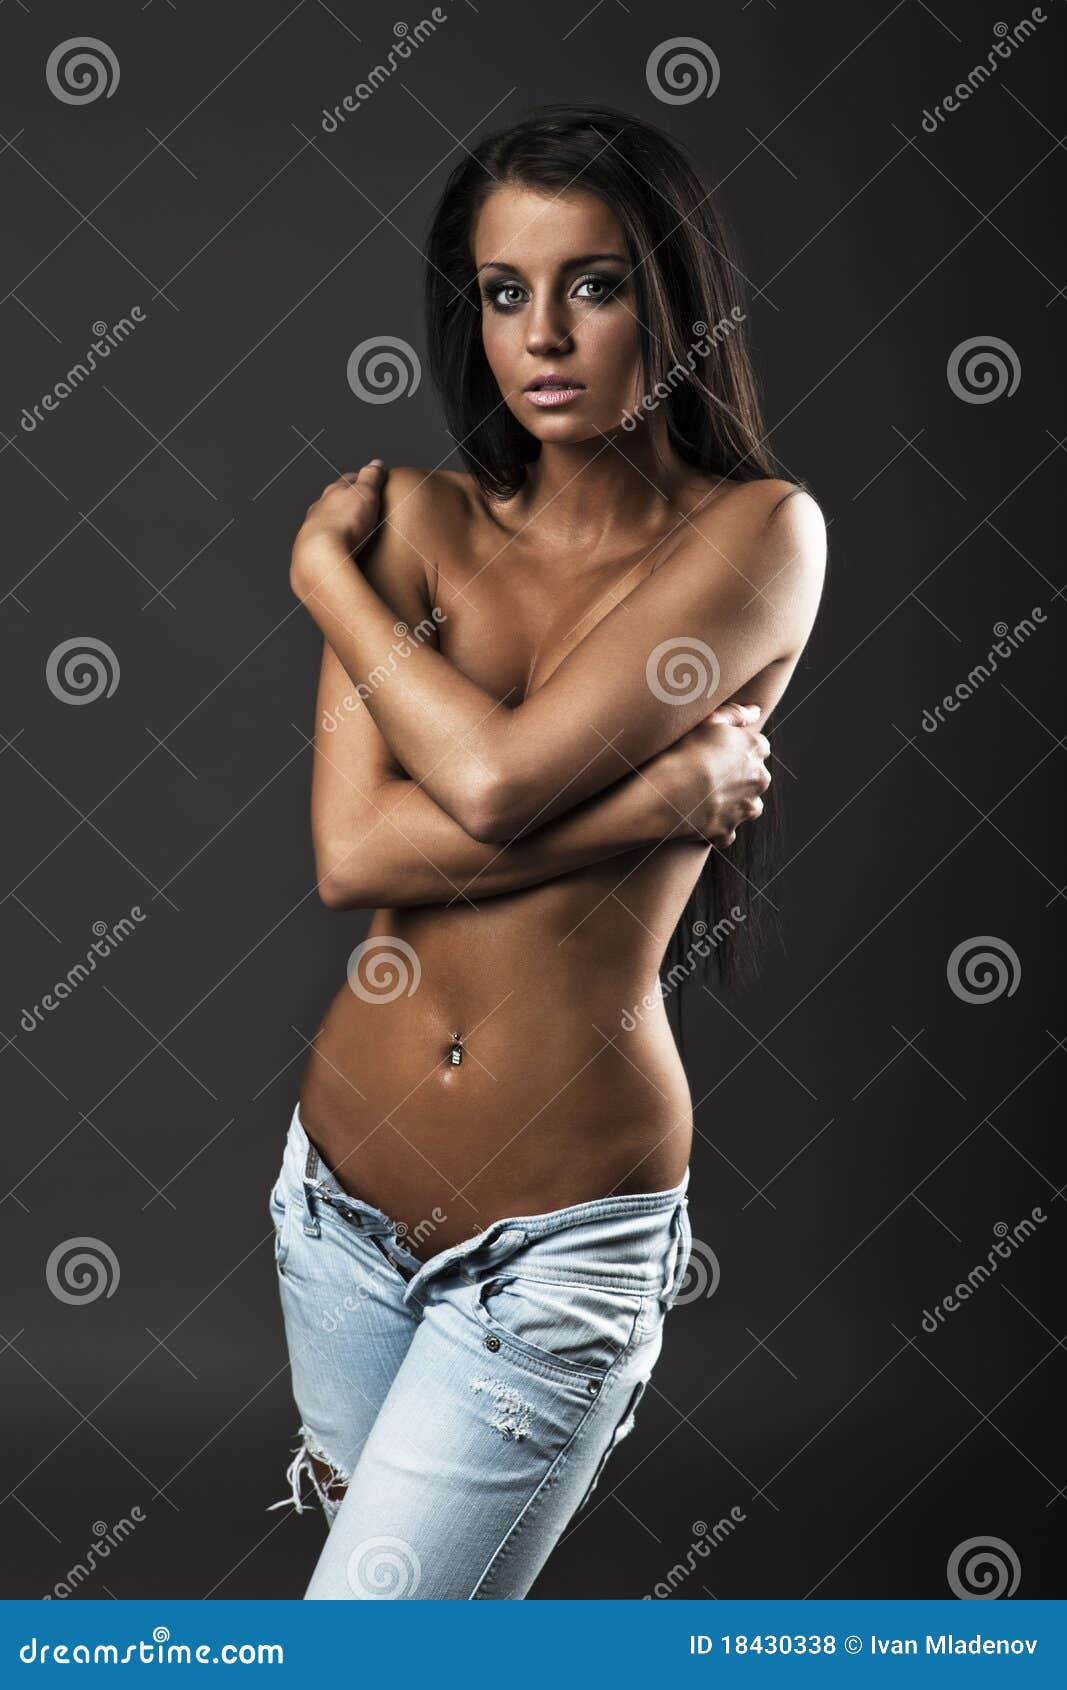 Topless Women Wearing Jeans public submission